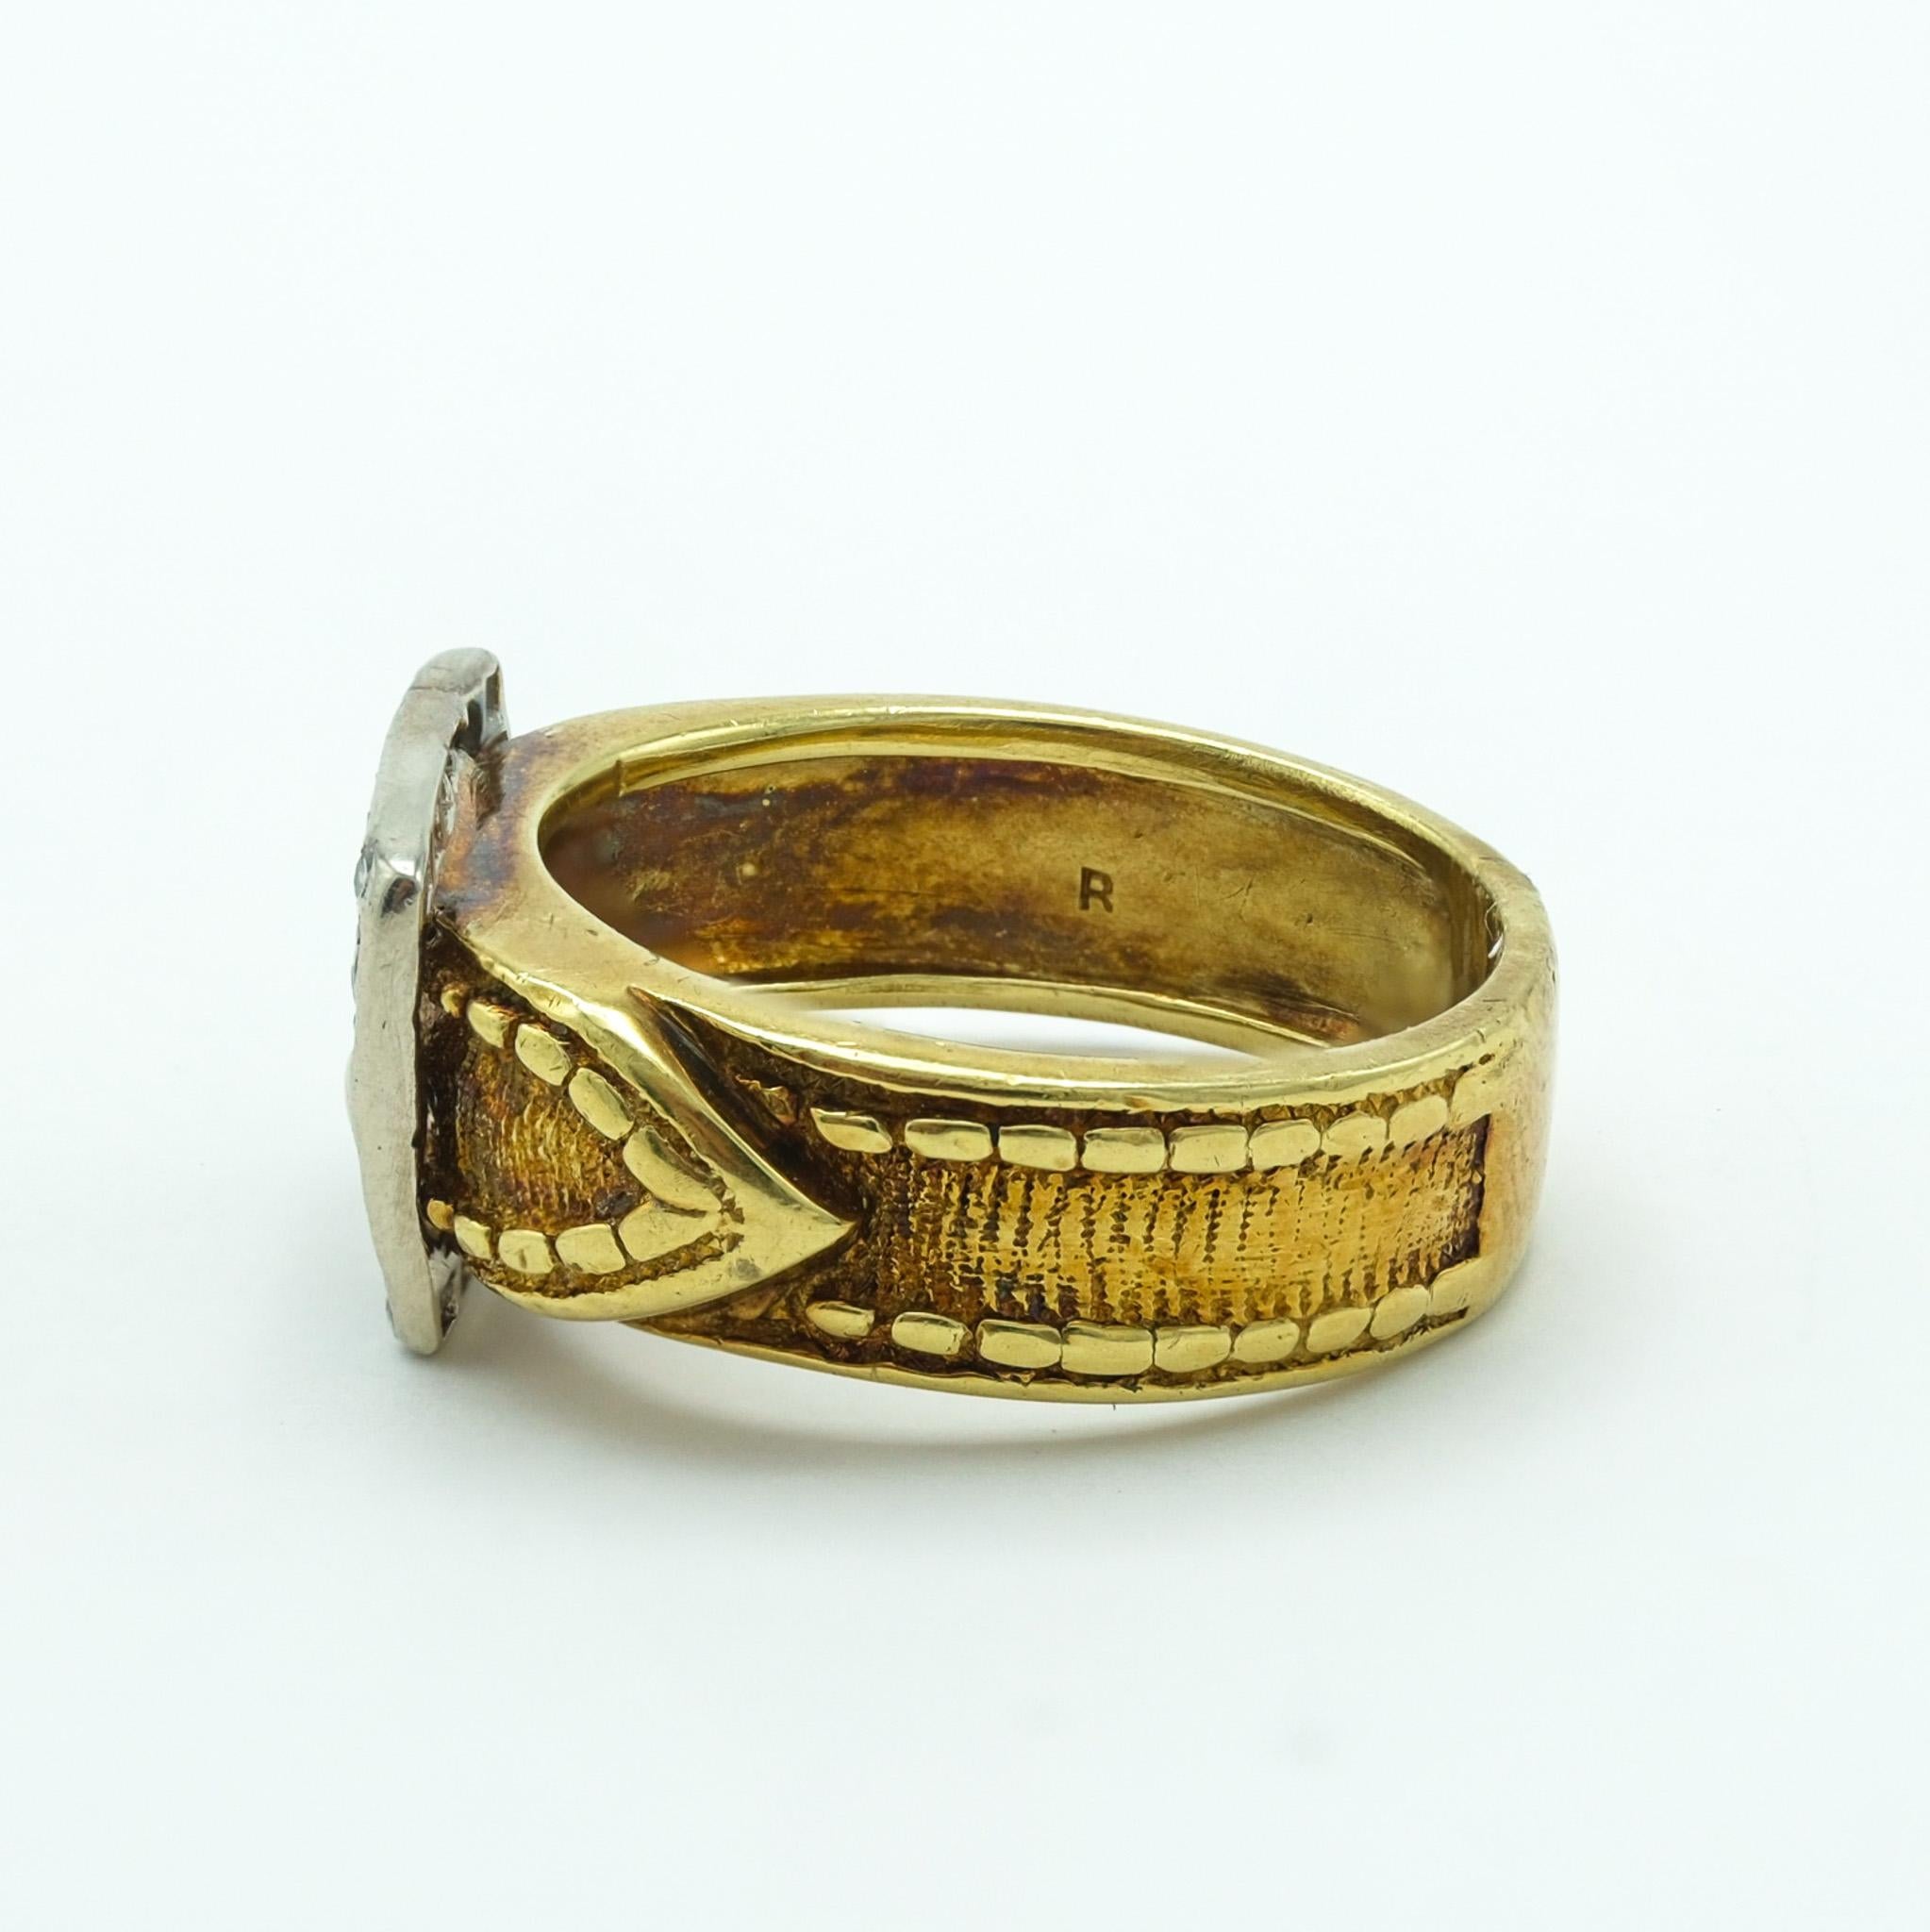 This vintage buckle ring is a testament to exquisite craftsmanship, forged from a blend of 18 karat yellow and white gold. The white gold buckle is lined with 17 round diamonds. The ring carries the graceful patina, hinting at its history and the